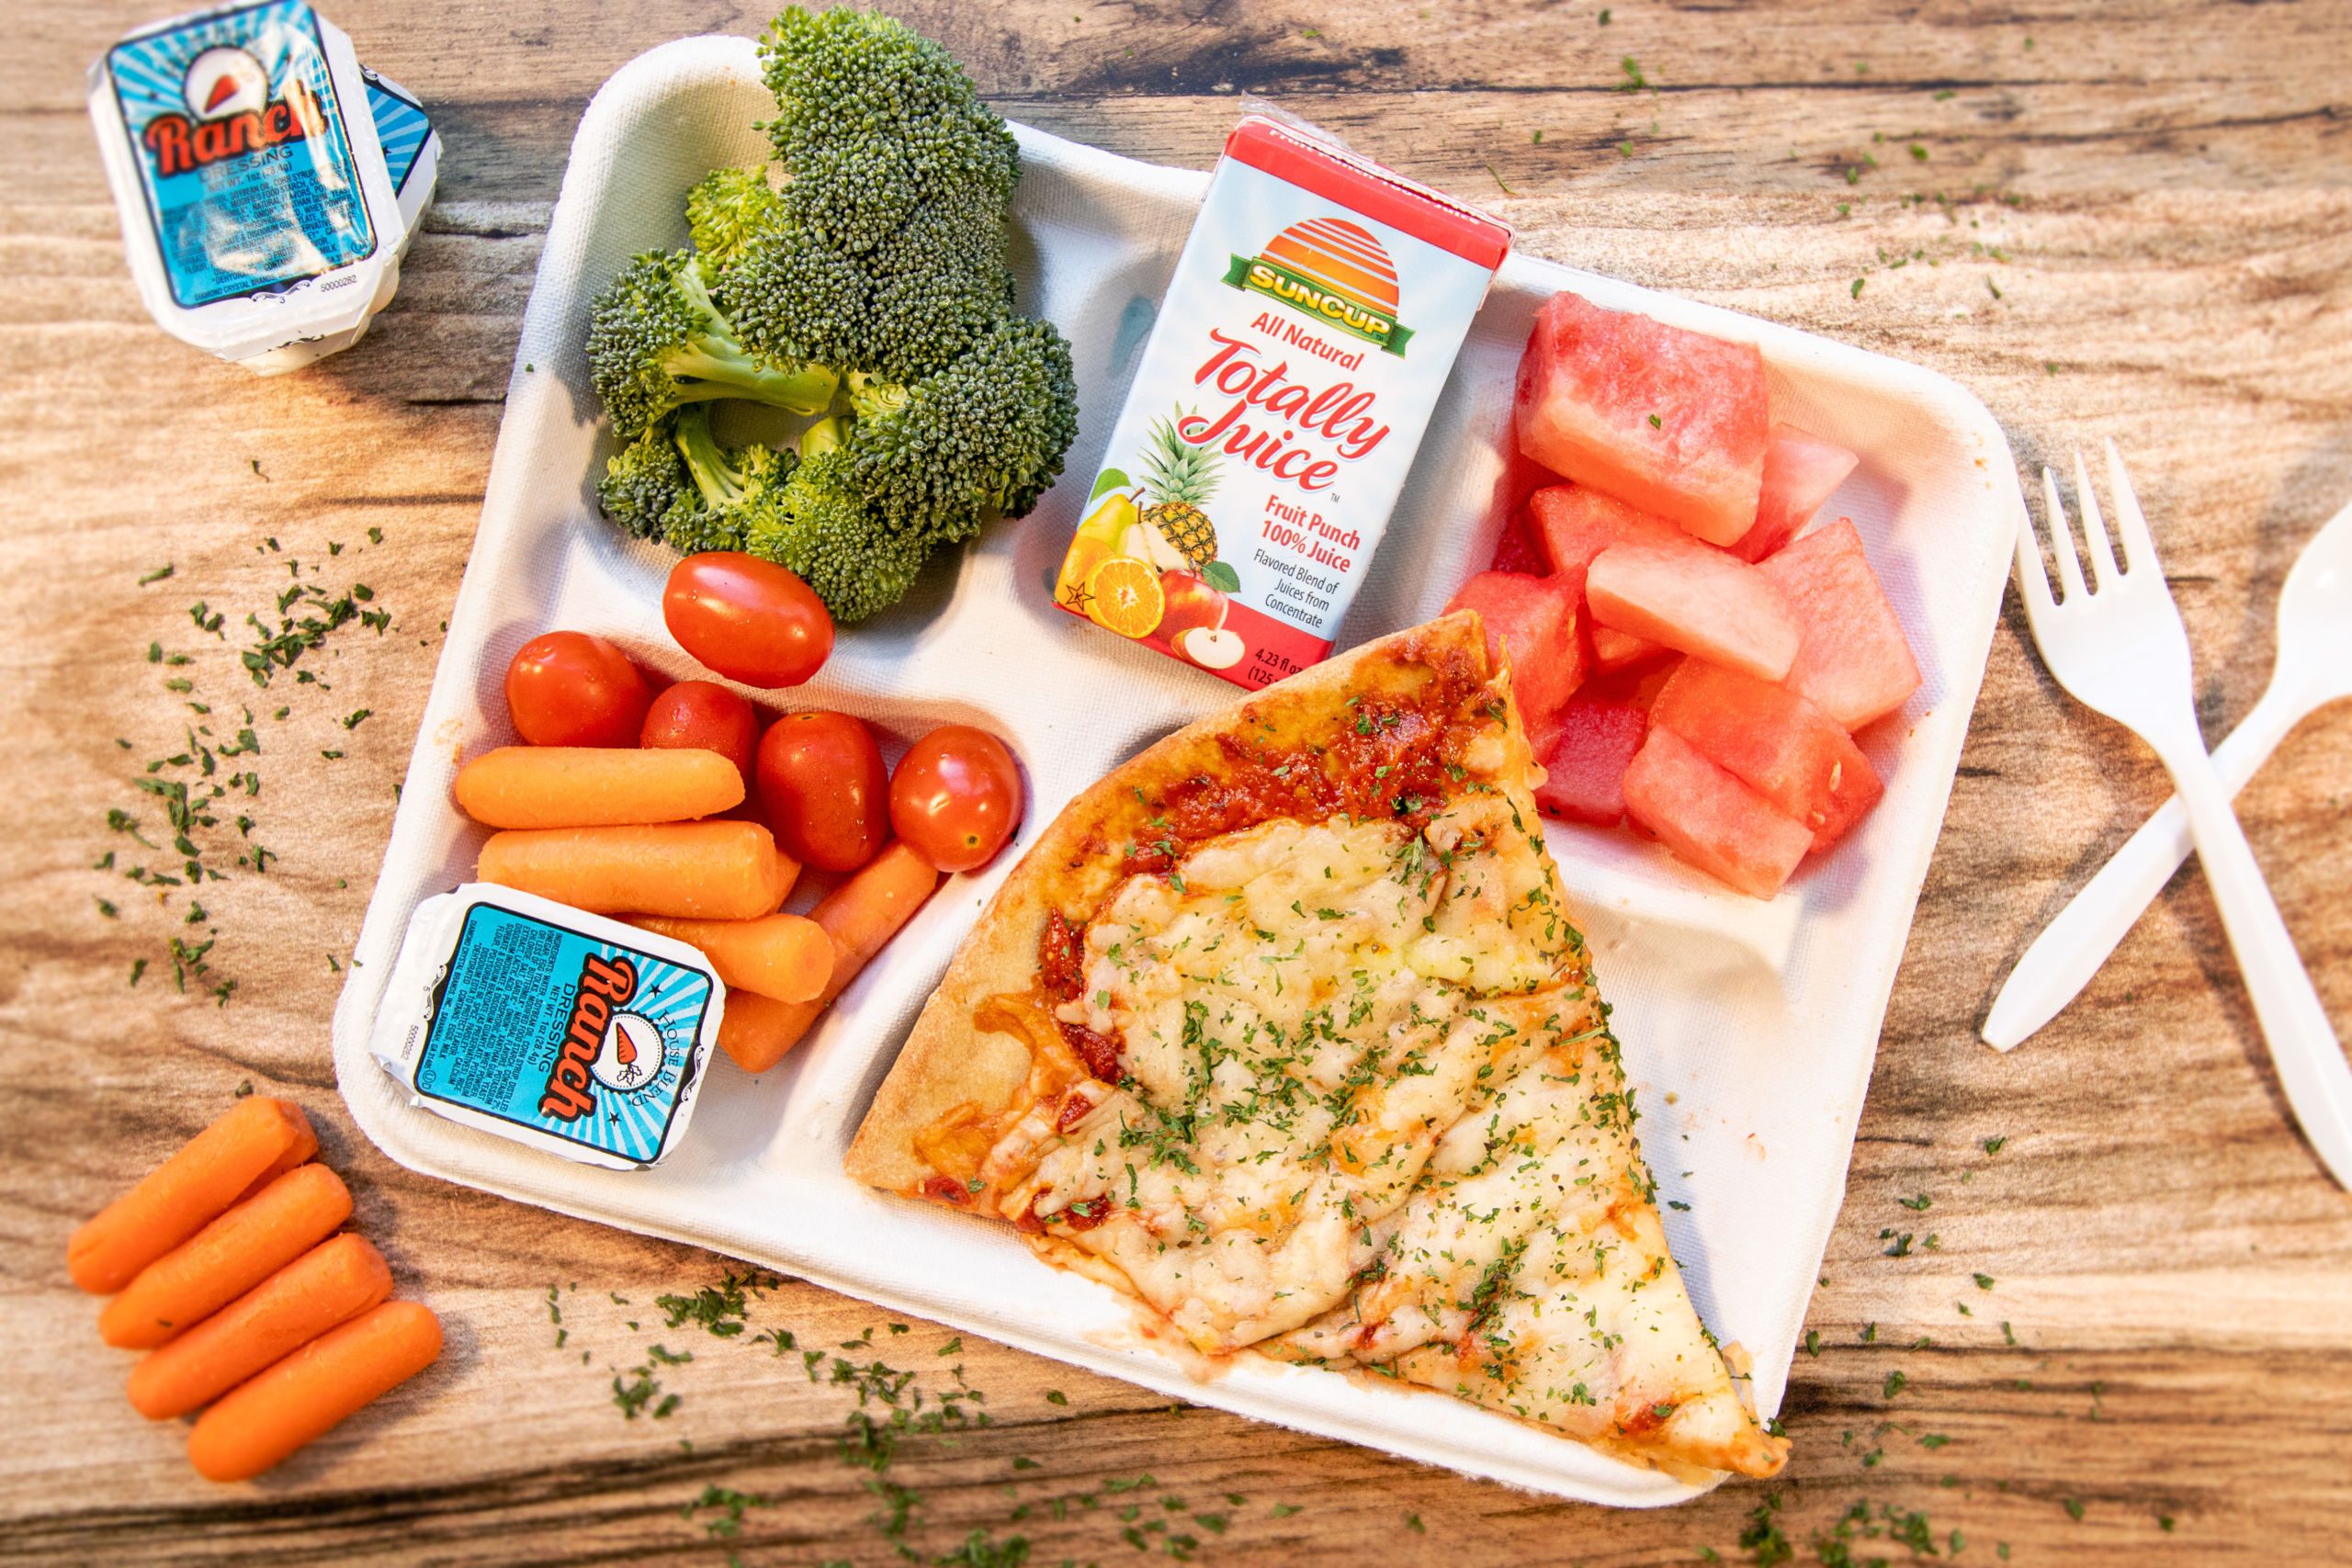 Photo shows a cafeteria tray with pizza, watermelon, broccoli, cherry tomatoes, and carrots on it. There is also utensils, more carrots, and ranch dressing to the sides of the tray.